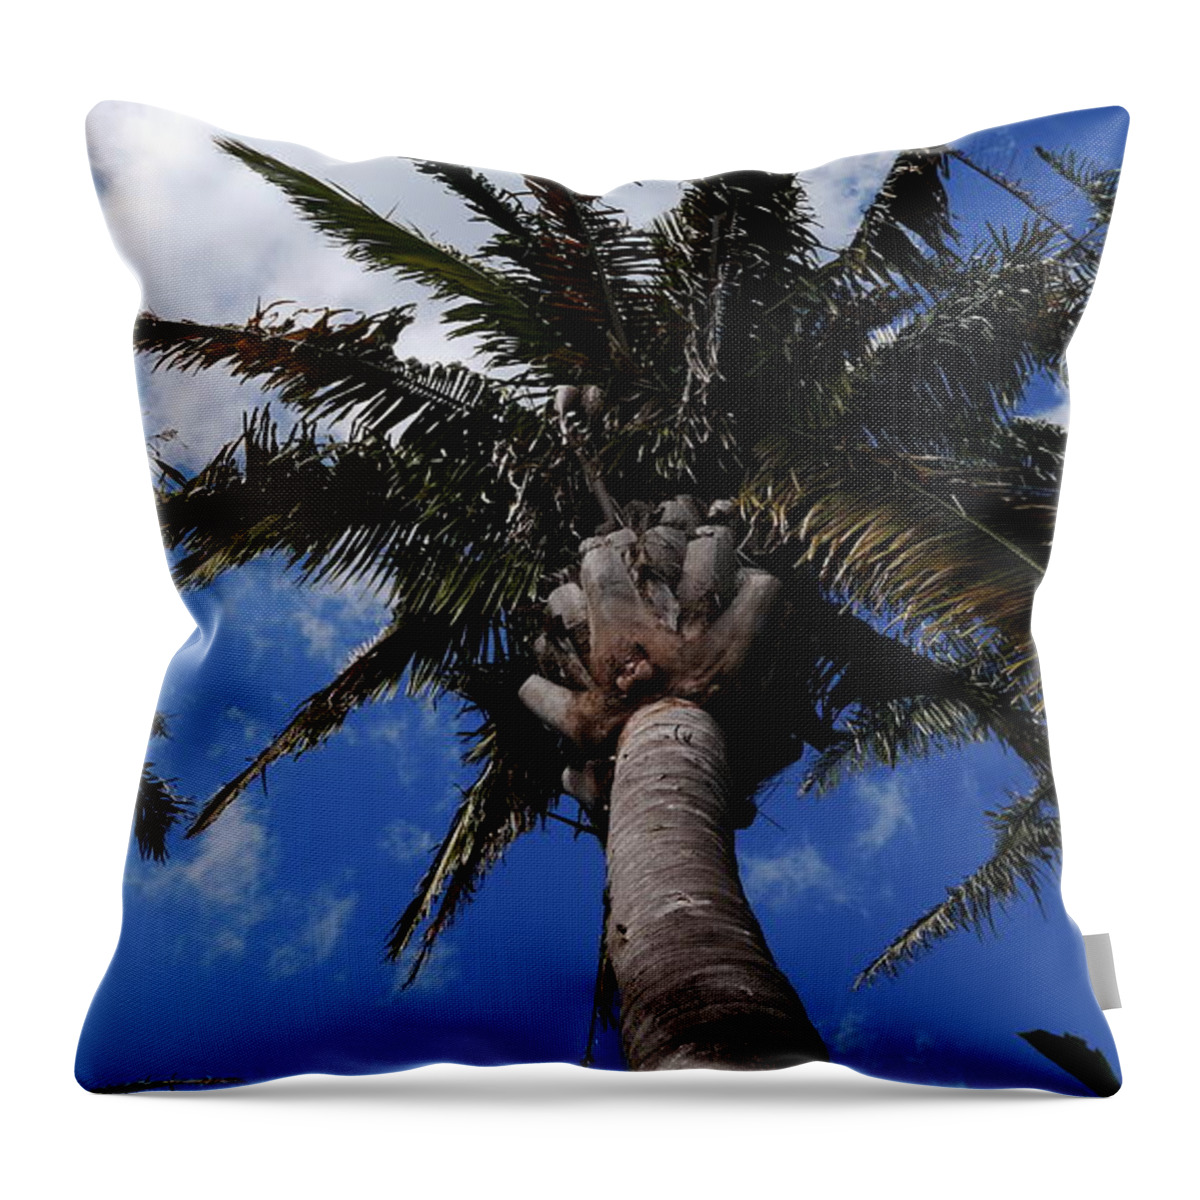 Palm Throw Pillow featuring the photograph Reaching For The Sky by Christiane Schulze Art And Photography